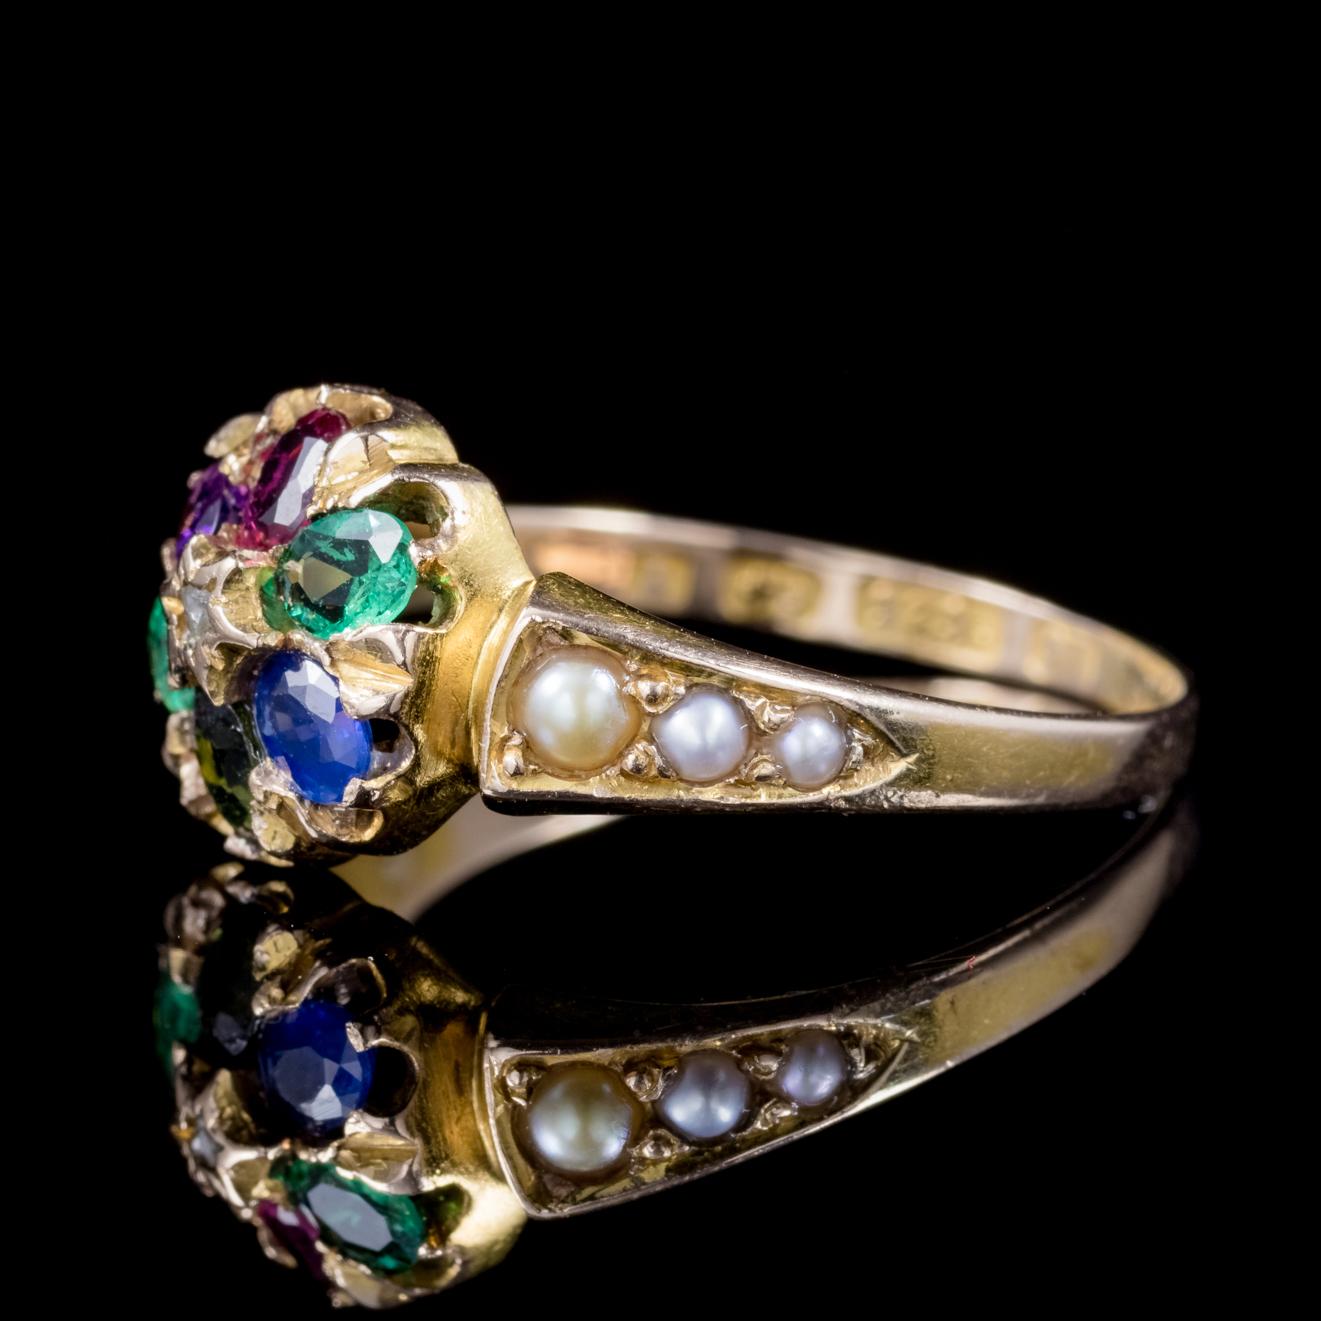 This beautiful antique Victorian Gemstone Dearest ring is fully hallmarked and dated Birmingham 1874.

The gemstones in the gallery spell out the word ‘Dearest’ with each first letter of the stone – Diamond - Emerald - Amethyst – Ruby – Emerald –